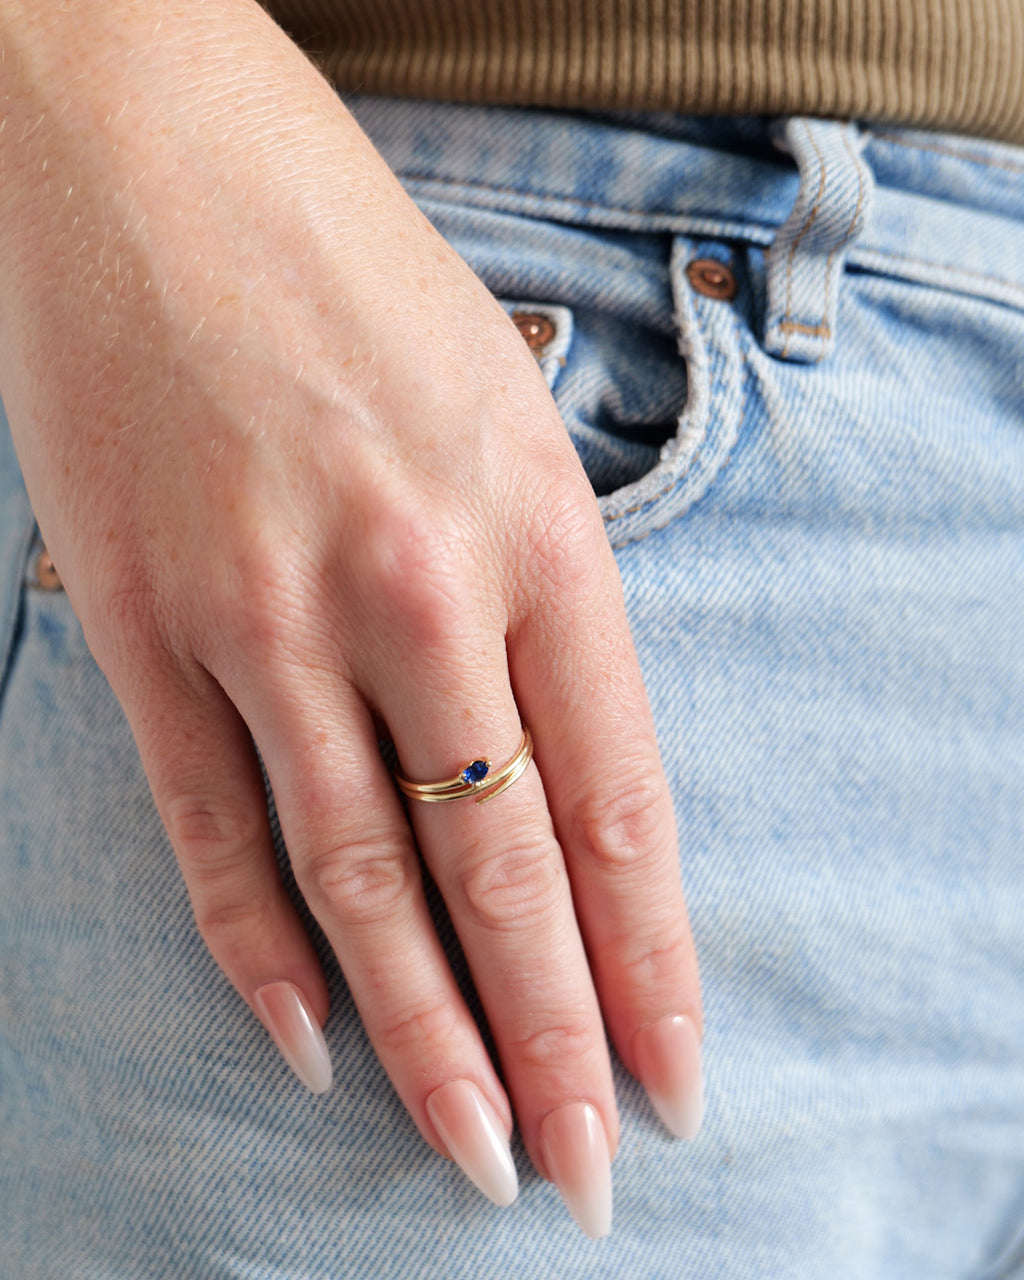 Gold Blue Stone Ring